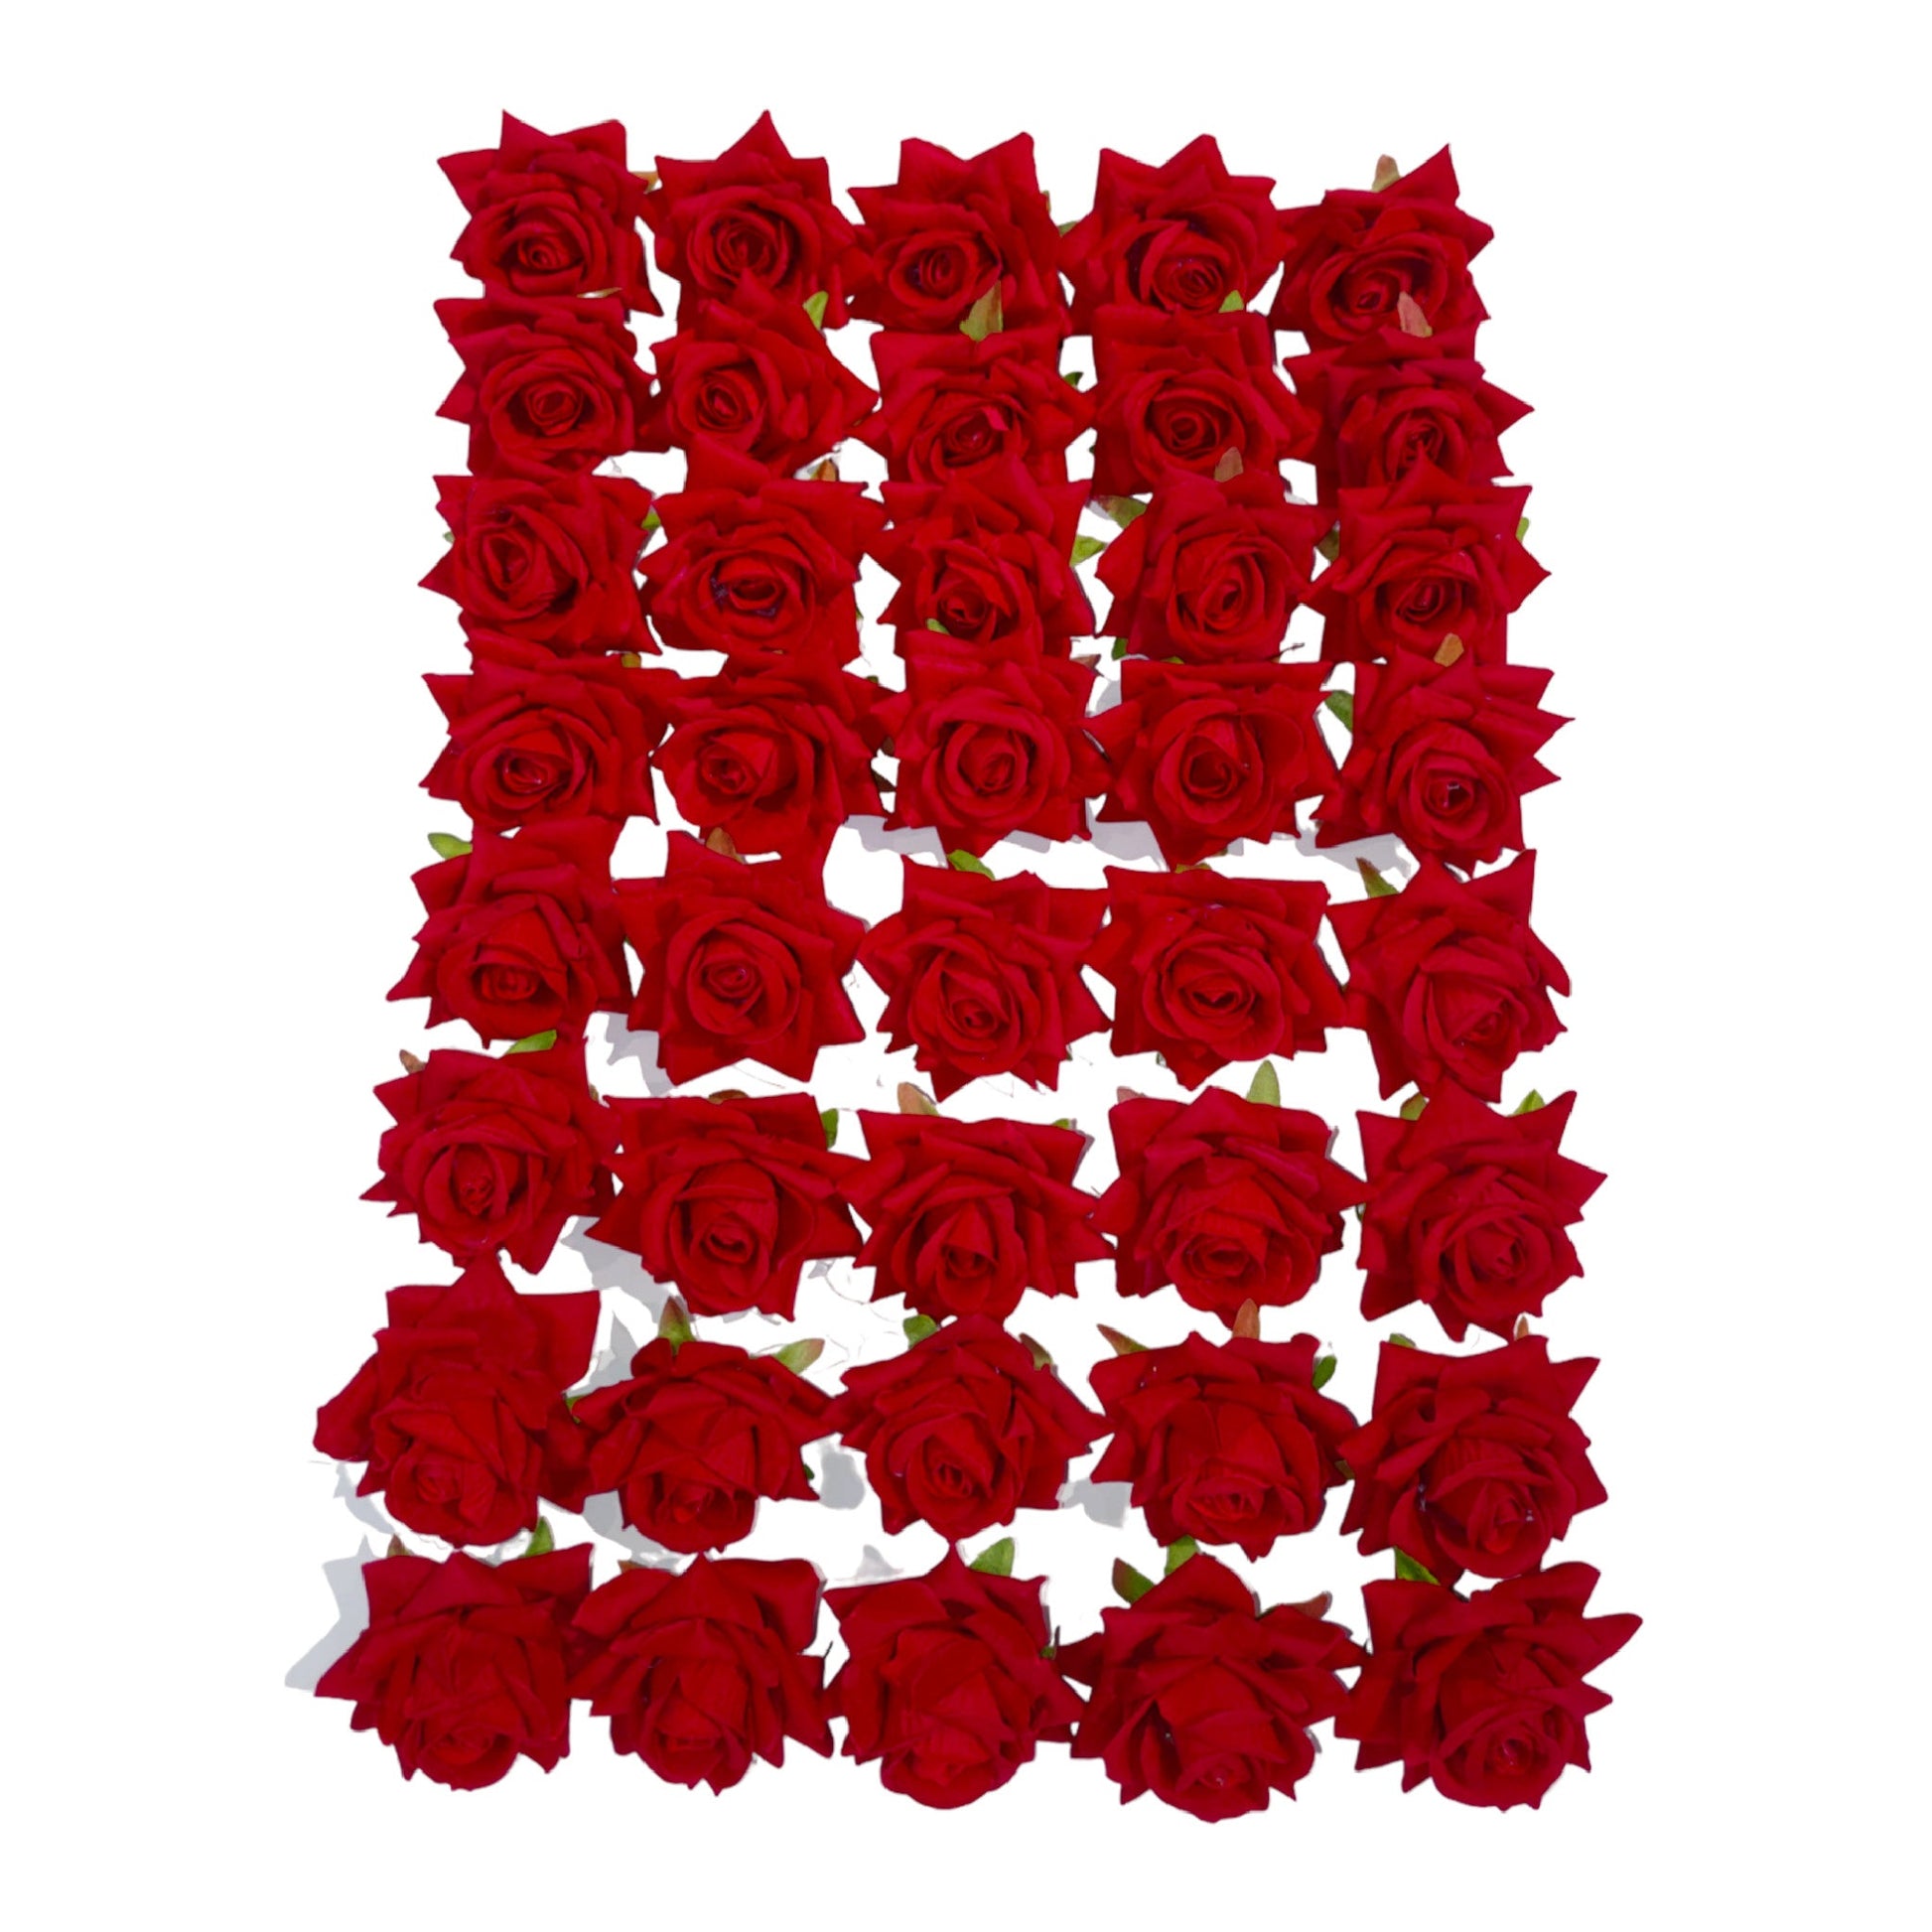 Decorative Artificial Rose Fabric Flower Head for Decor Craft or Textile